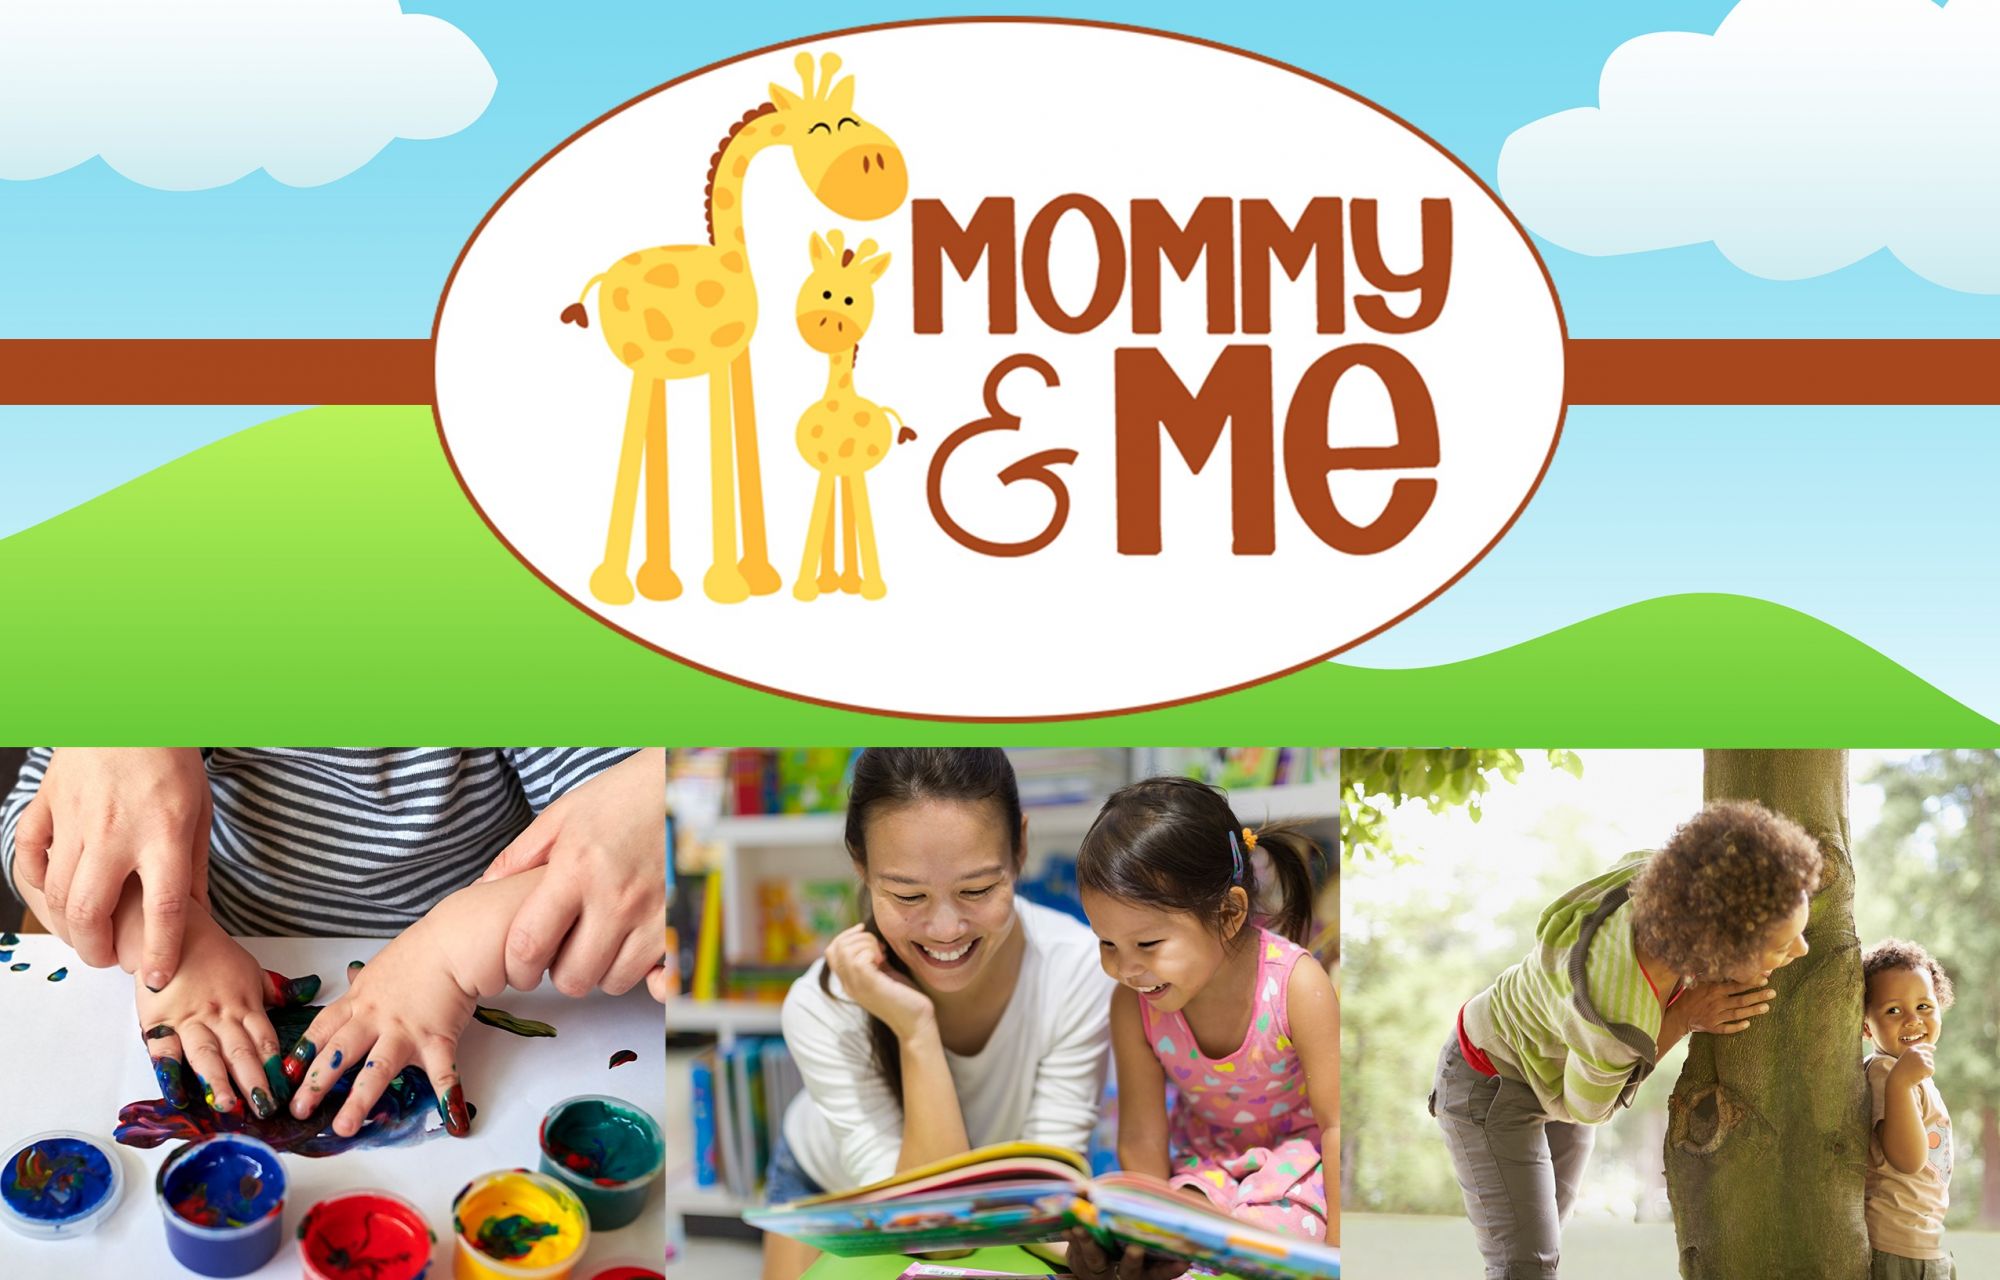 andrei dobrescu recommends mommy and me 5 pic